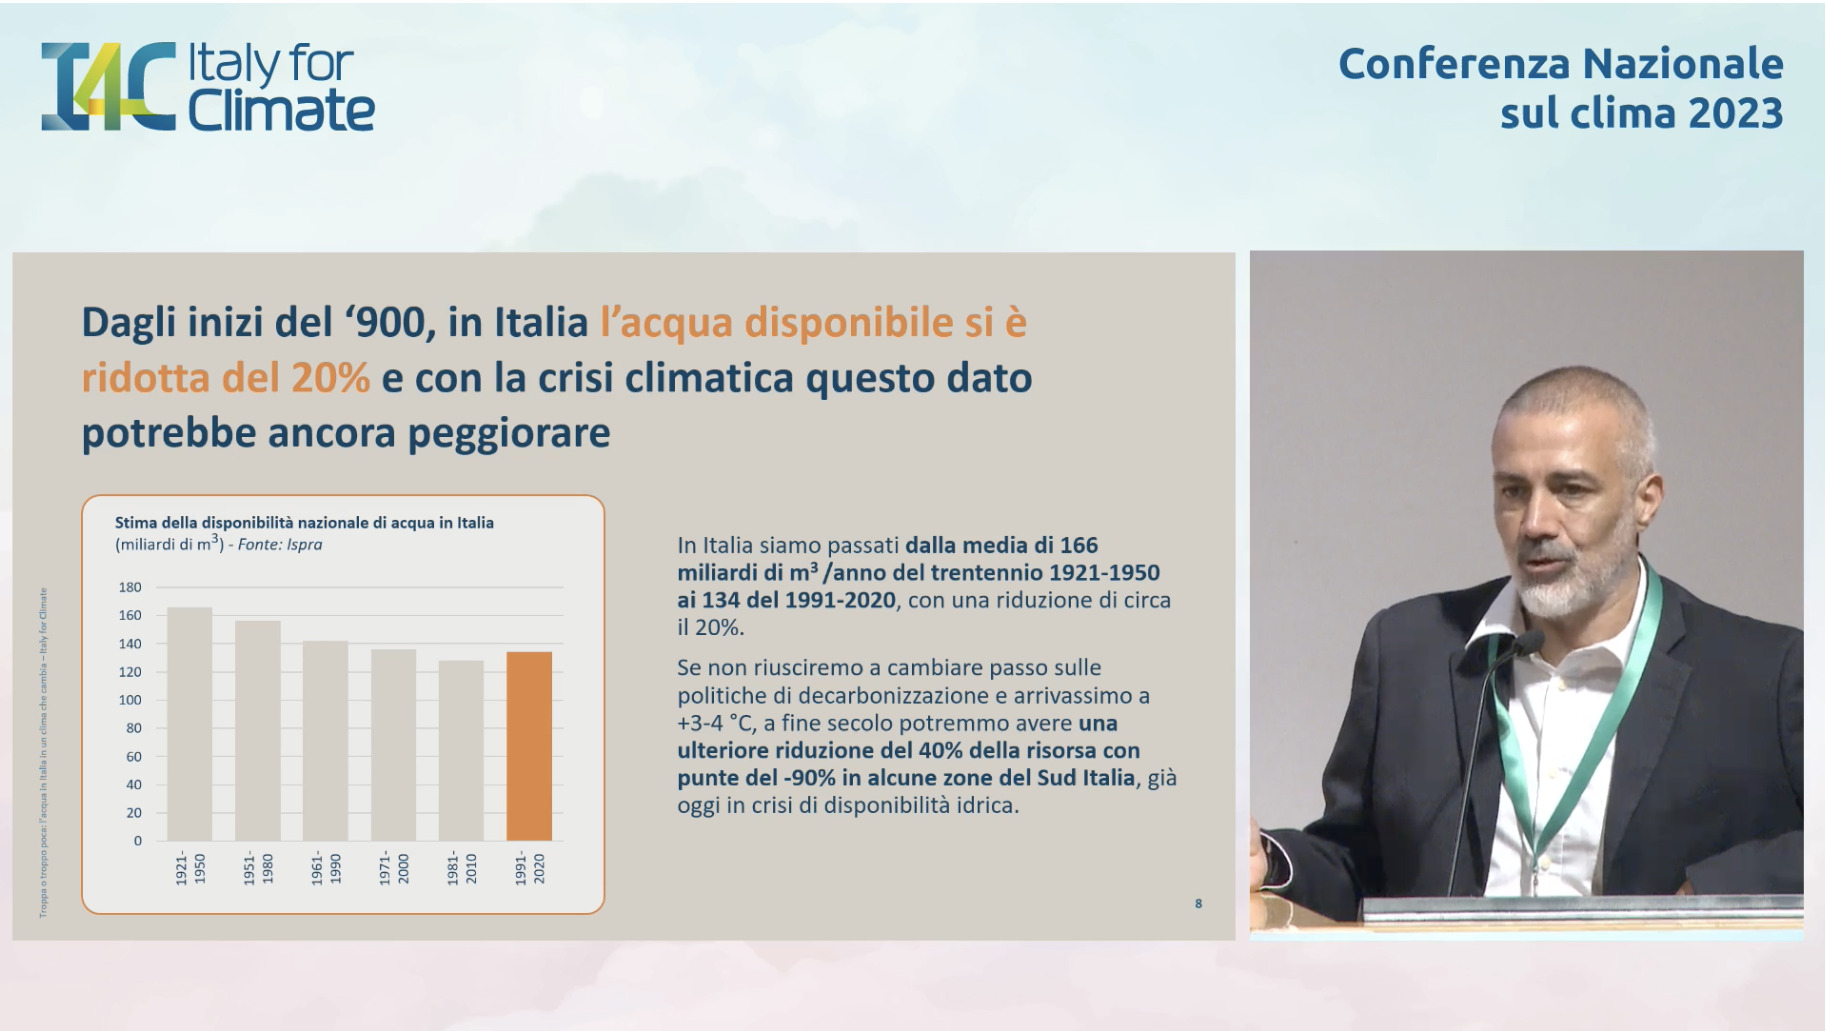 Italy for Climate